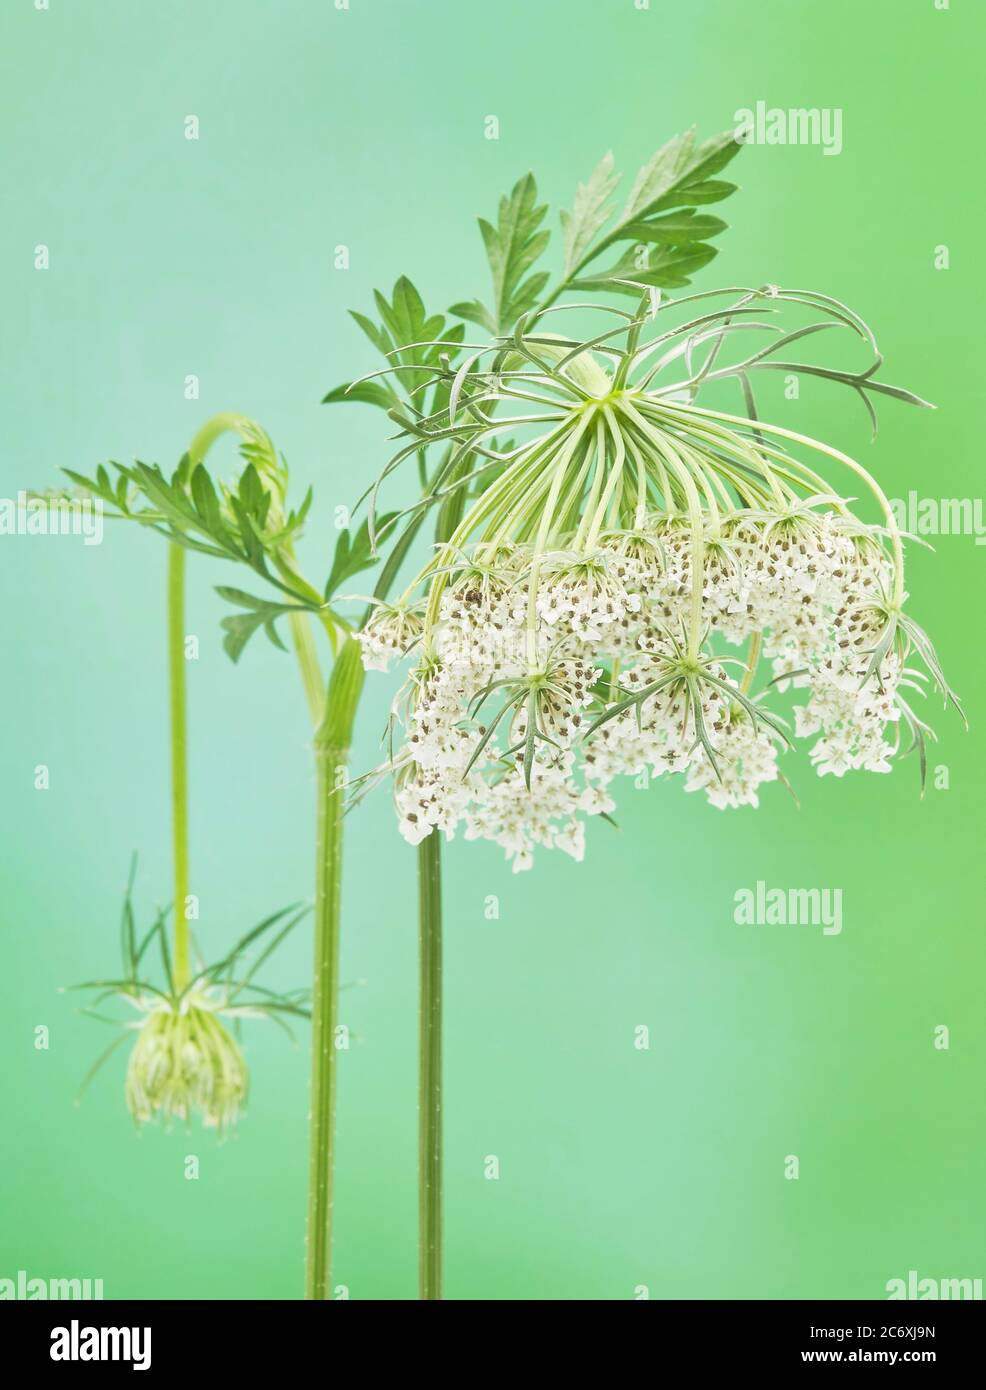 Closeup photograph of the invasive biennial herb known as Queen Annes Lace Daucus carota.  The plant smells similar to carrot and young roots are actu Stock Photo